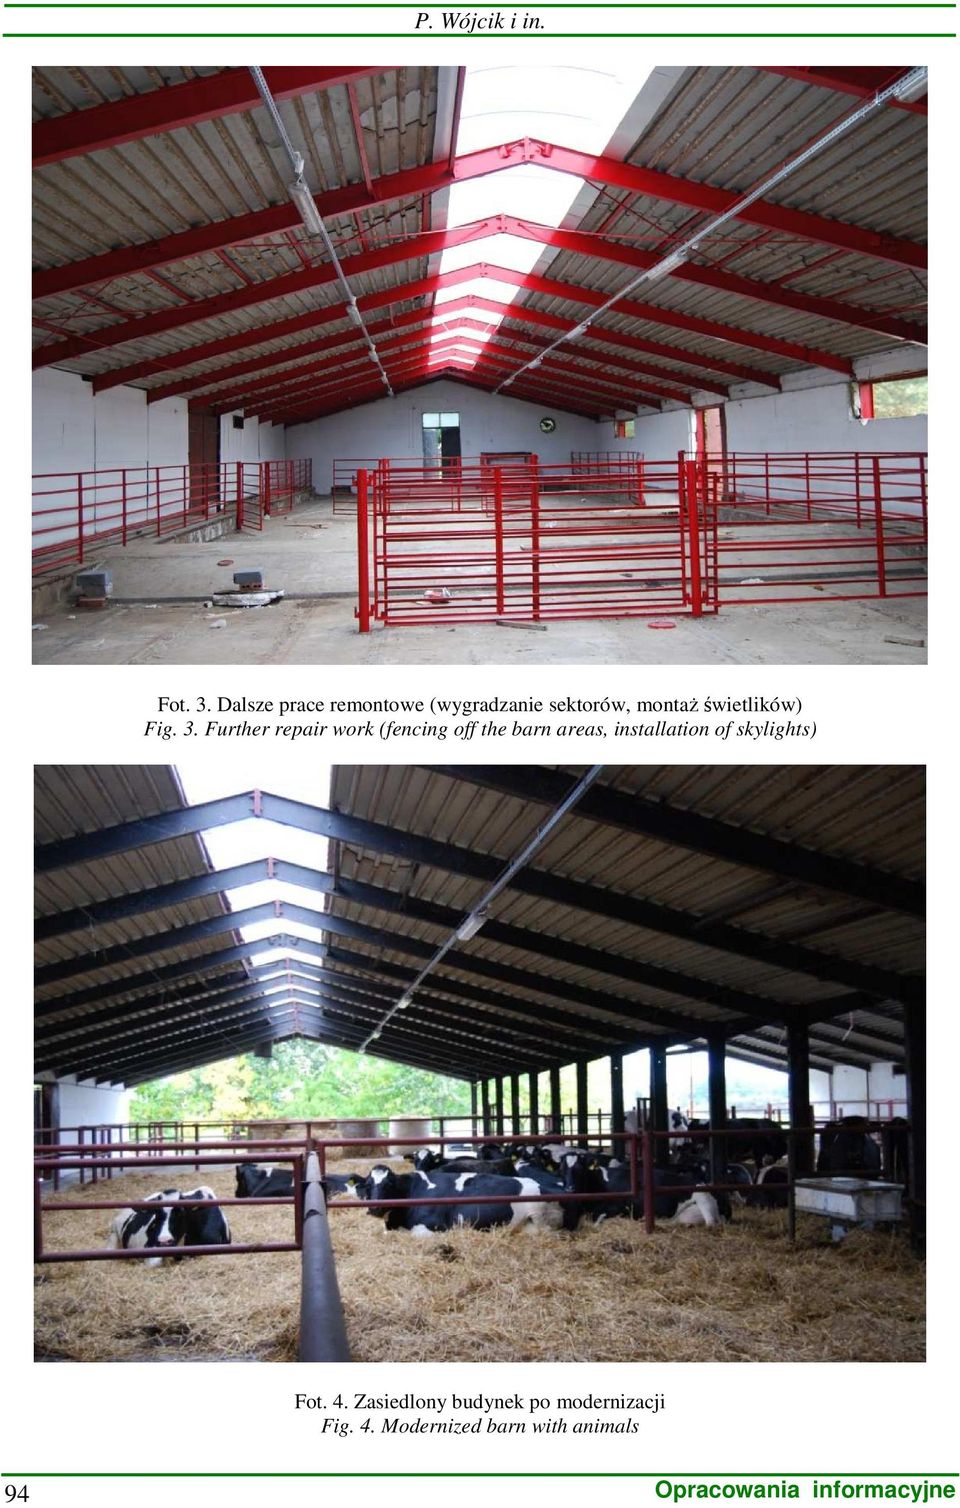 3. Further repair work (fencing off the barn areas, installation of